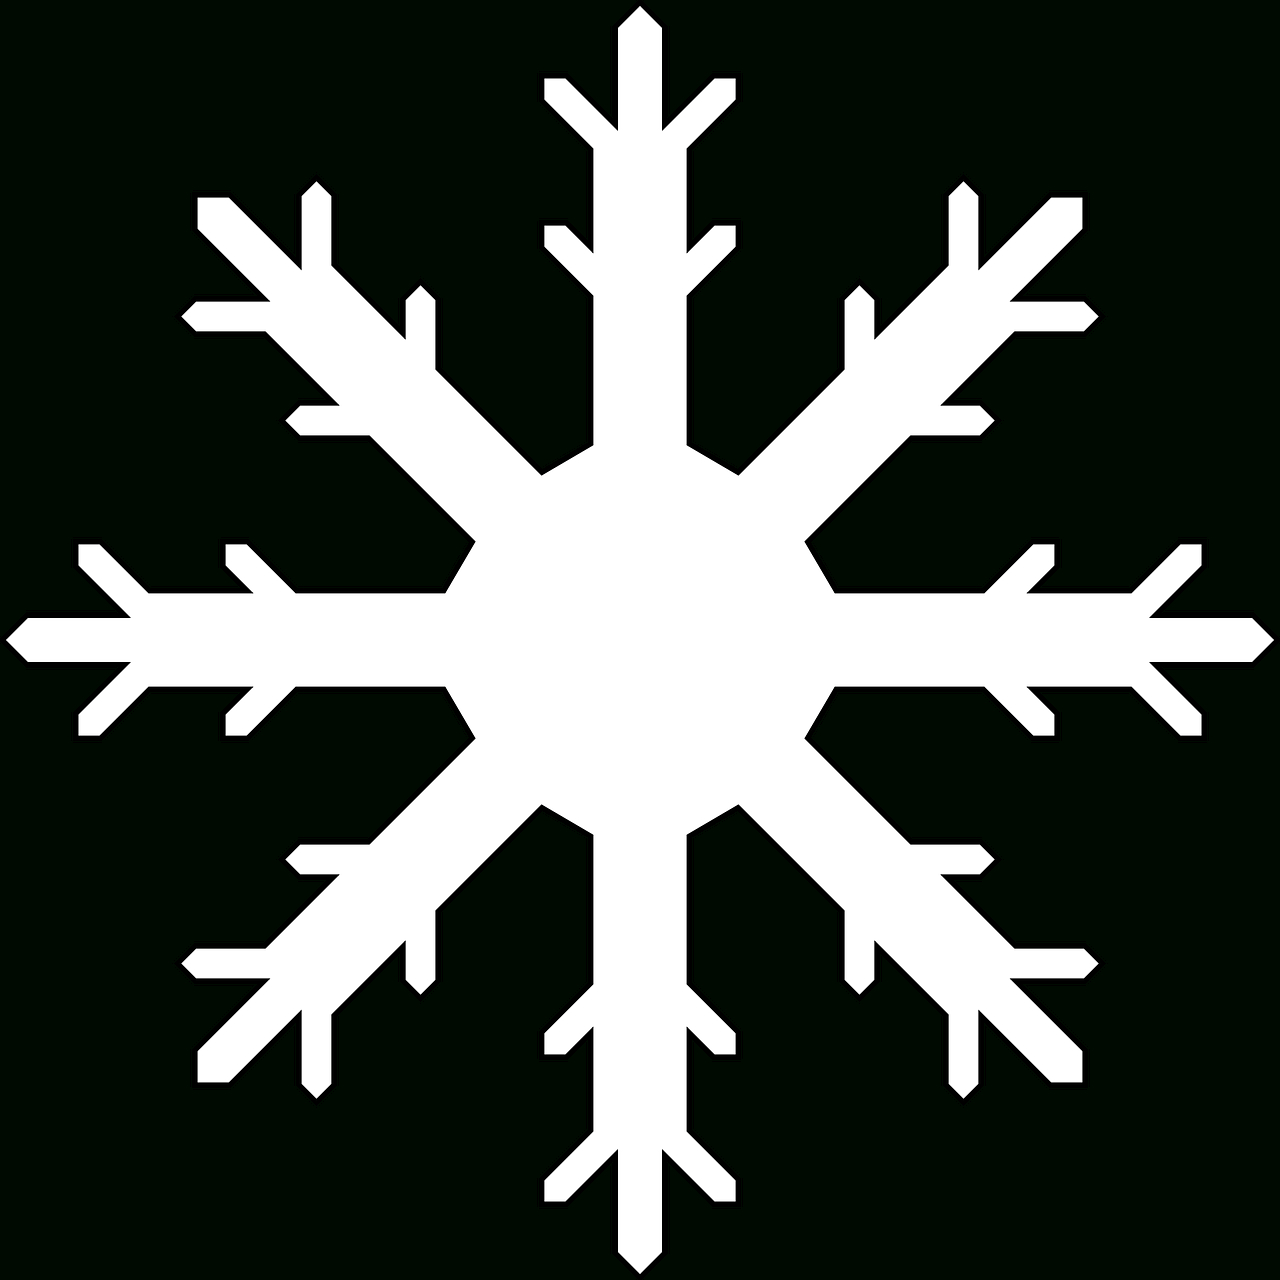 Snowflake Colouring Pages Frozen Snowflake Coloring Pages